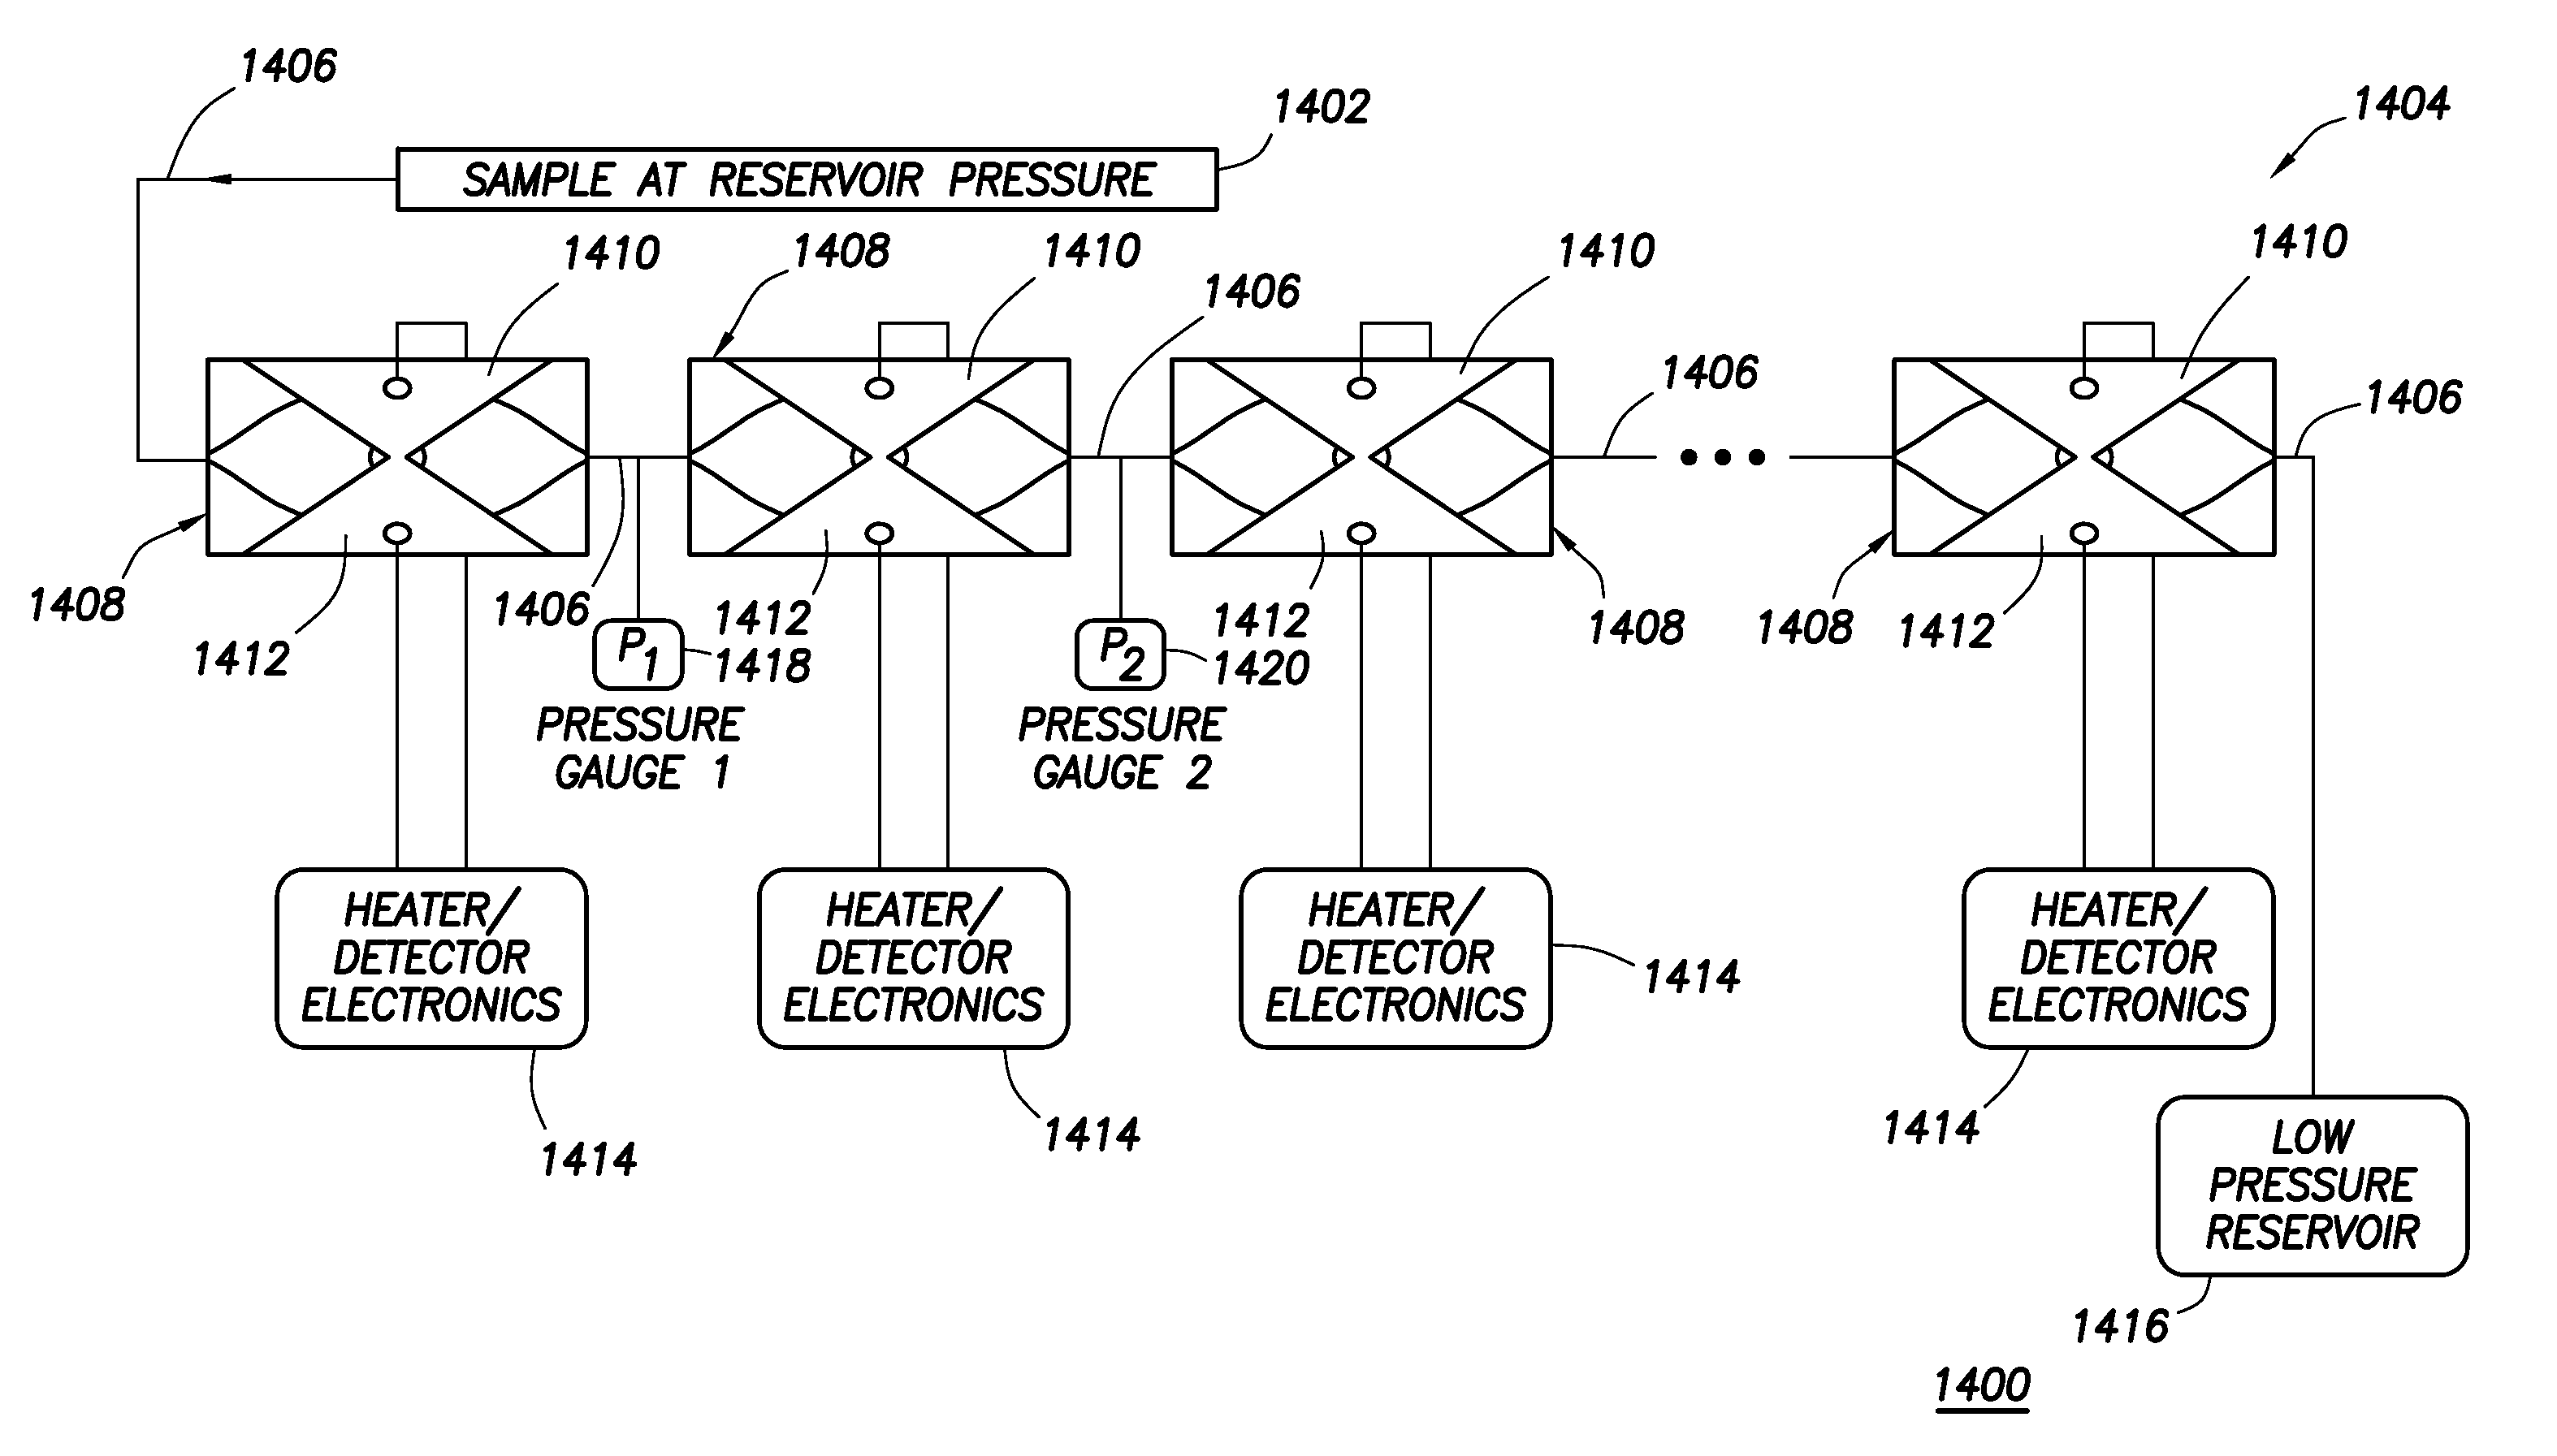 Thermal bubble point measurement system and method